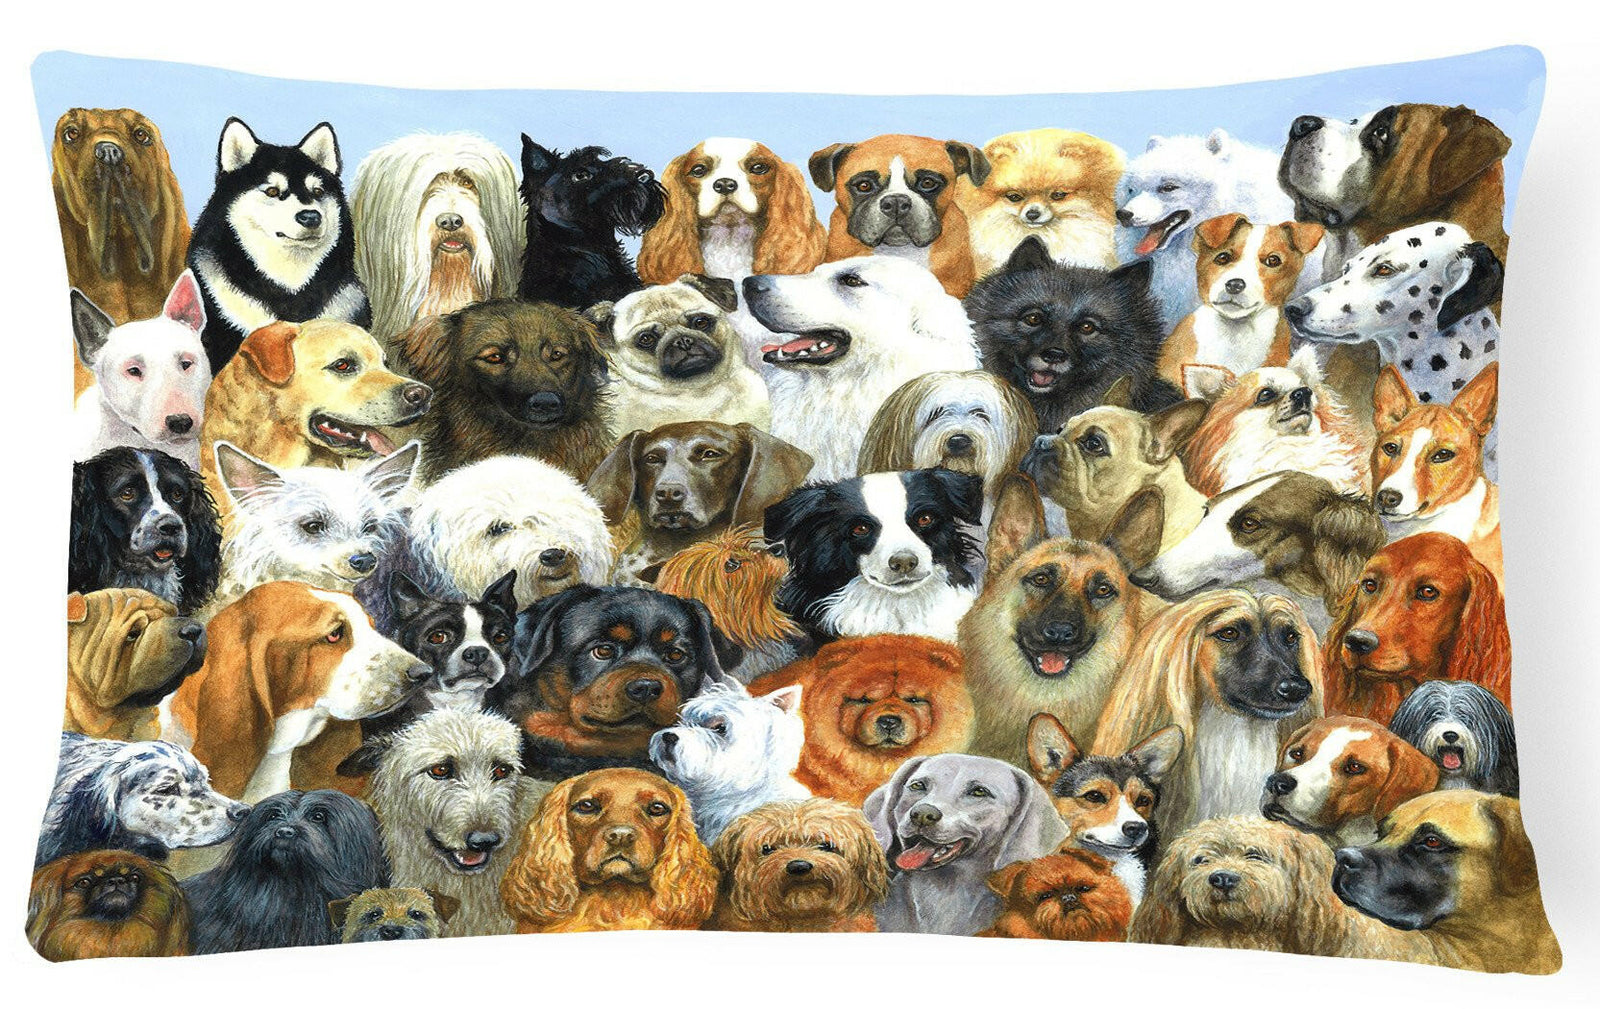 Fifty One Dogs Fabric Decorative Pillow BDBA0441PW1216 by Caroline's Treasures